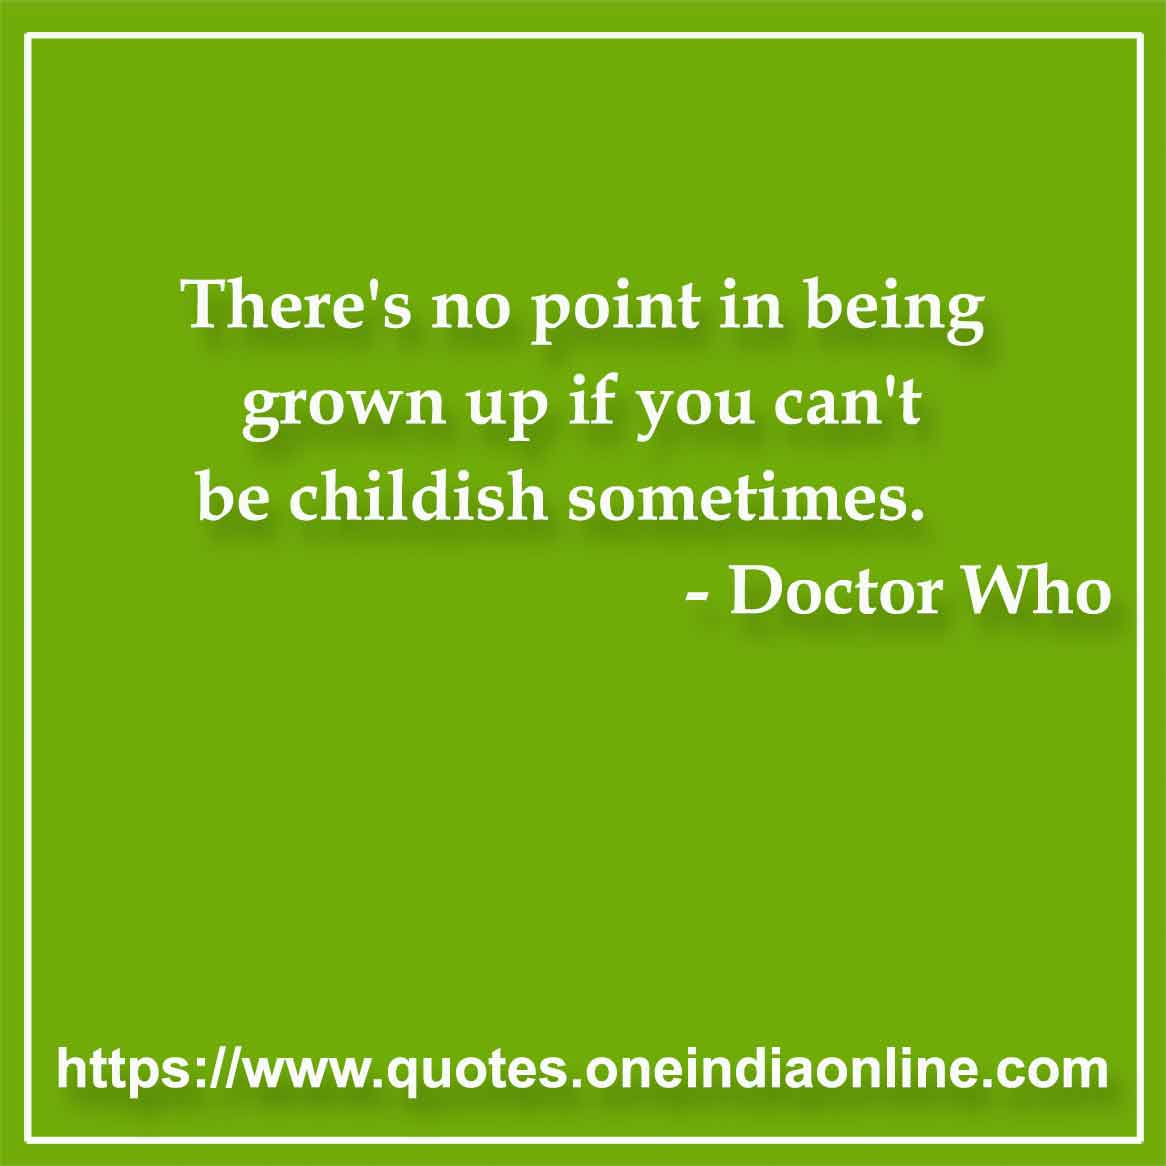 There's no point in being grown up if you can't be childish sometimes.

- Maturity Quotes by Doctor Who